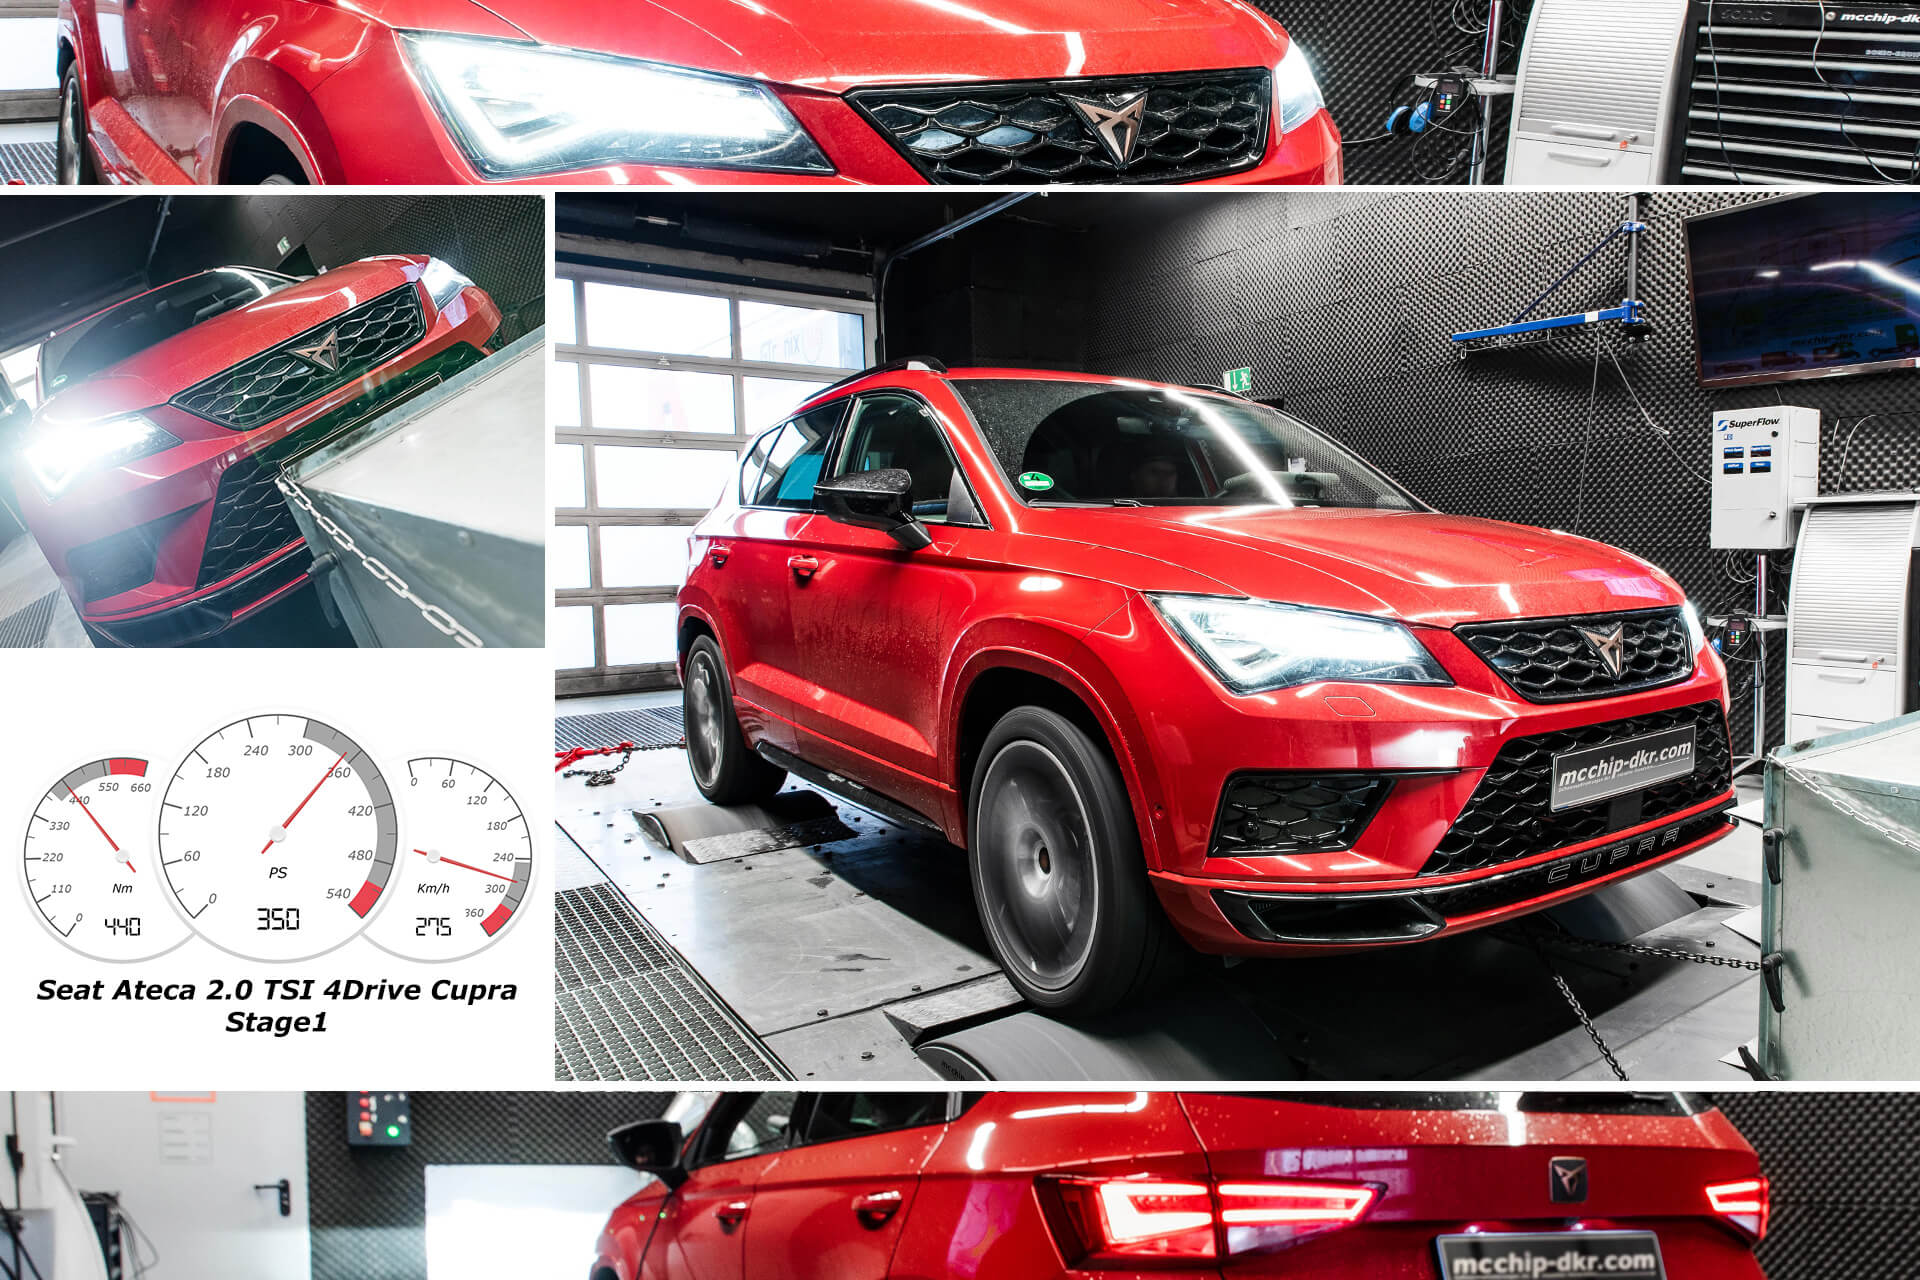 https://s1.cdn.autoevolution.com/images/news/cupra-ateca-tuned-to-475-ps-510-nm-by-mcchip-dkr-140135_1.jpg